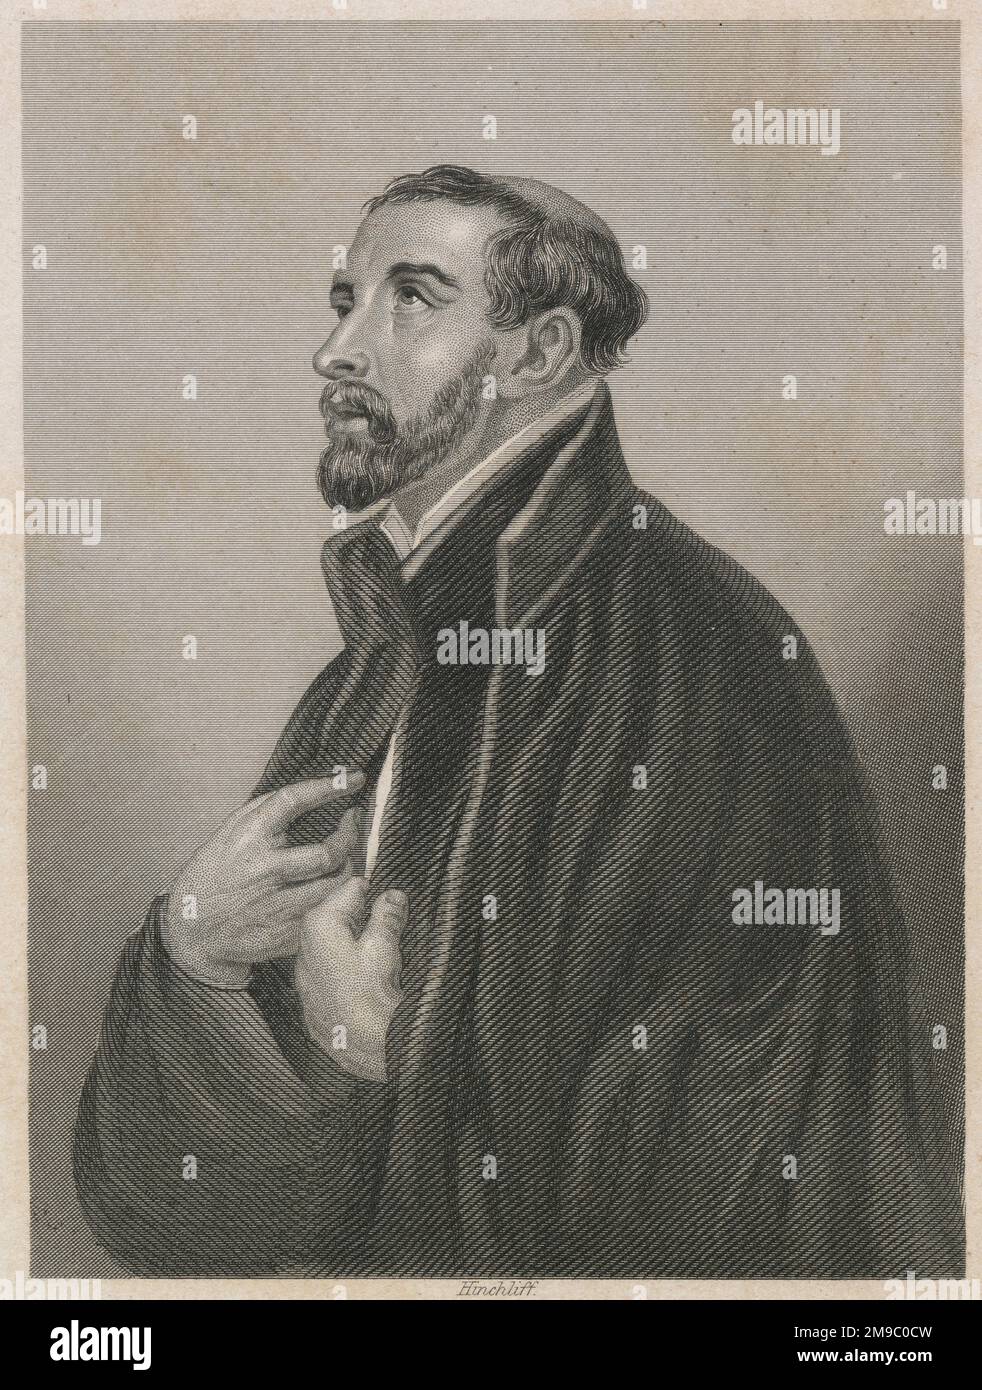 Antique circa 1860 engraving, portrait of Francis Xavier. Francis Xavier (1506-1552), venerated as Saint Francis Xavier, was a Navarrese Catholic missionary and saint who was a co-founder of the Society of Jesus. SOURCE: ORIGINAL ENGRAVING Stock Photo